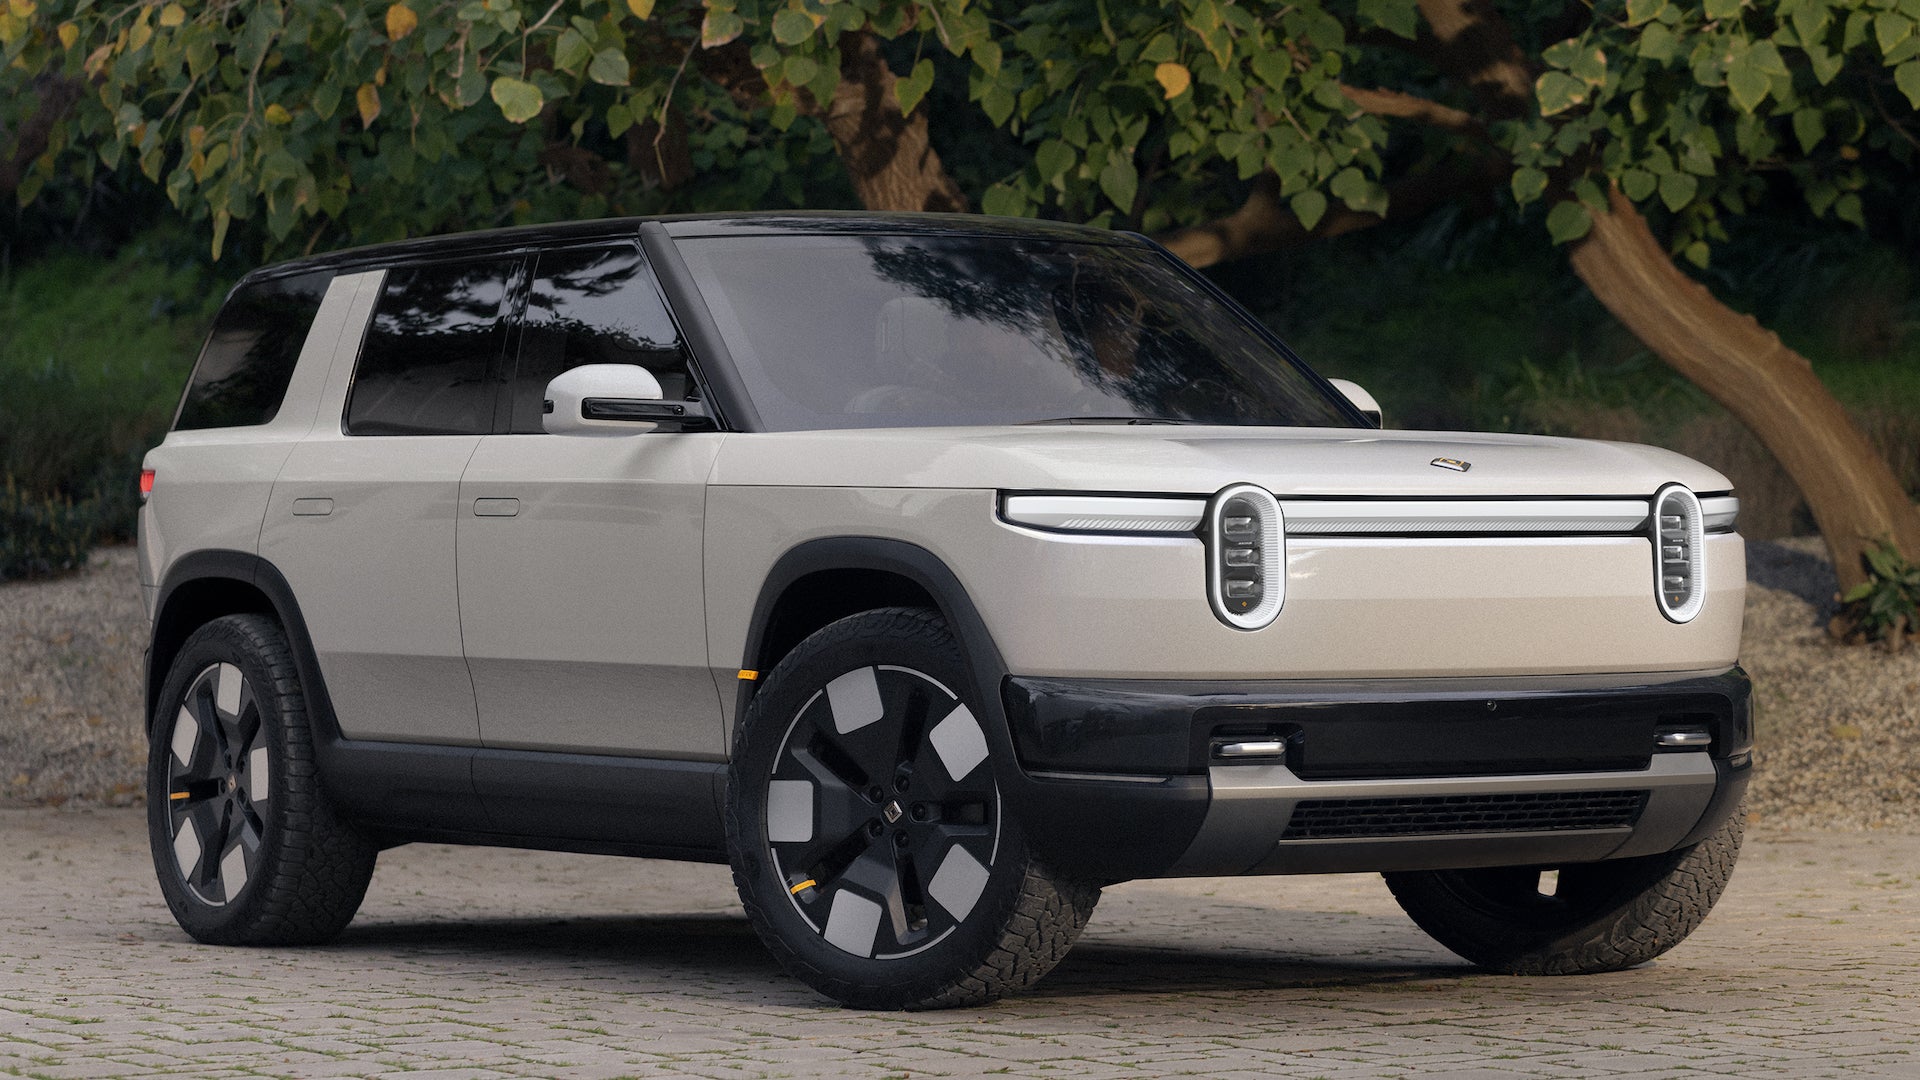 In 2026, the Rivian R2 debuts boasting a range exceeding 300 miles, self-driving capabilities, and acceleration from 0-60 mph in under 3 seconds.